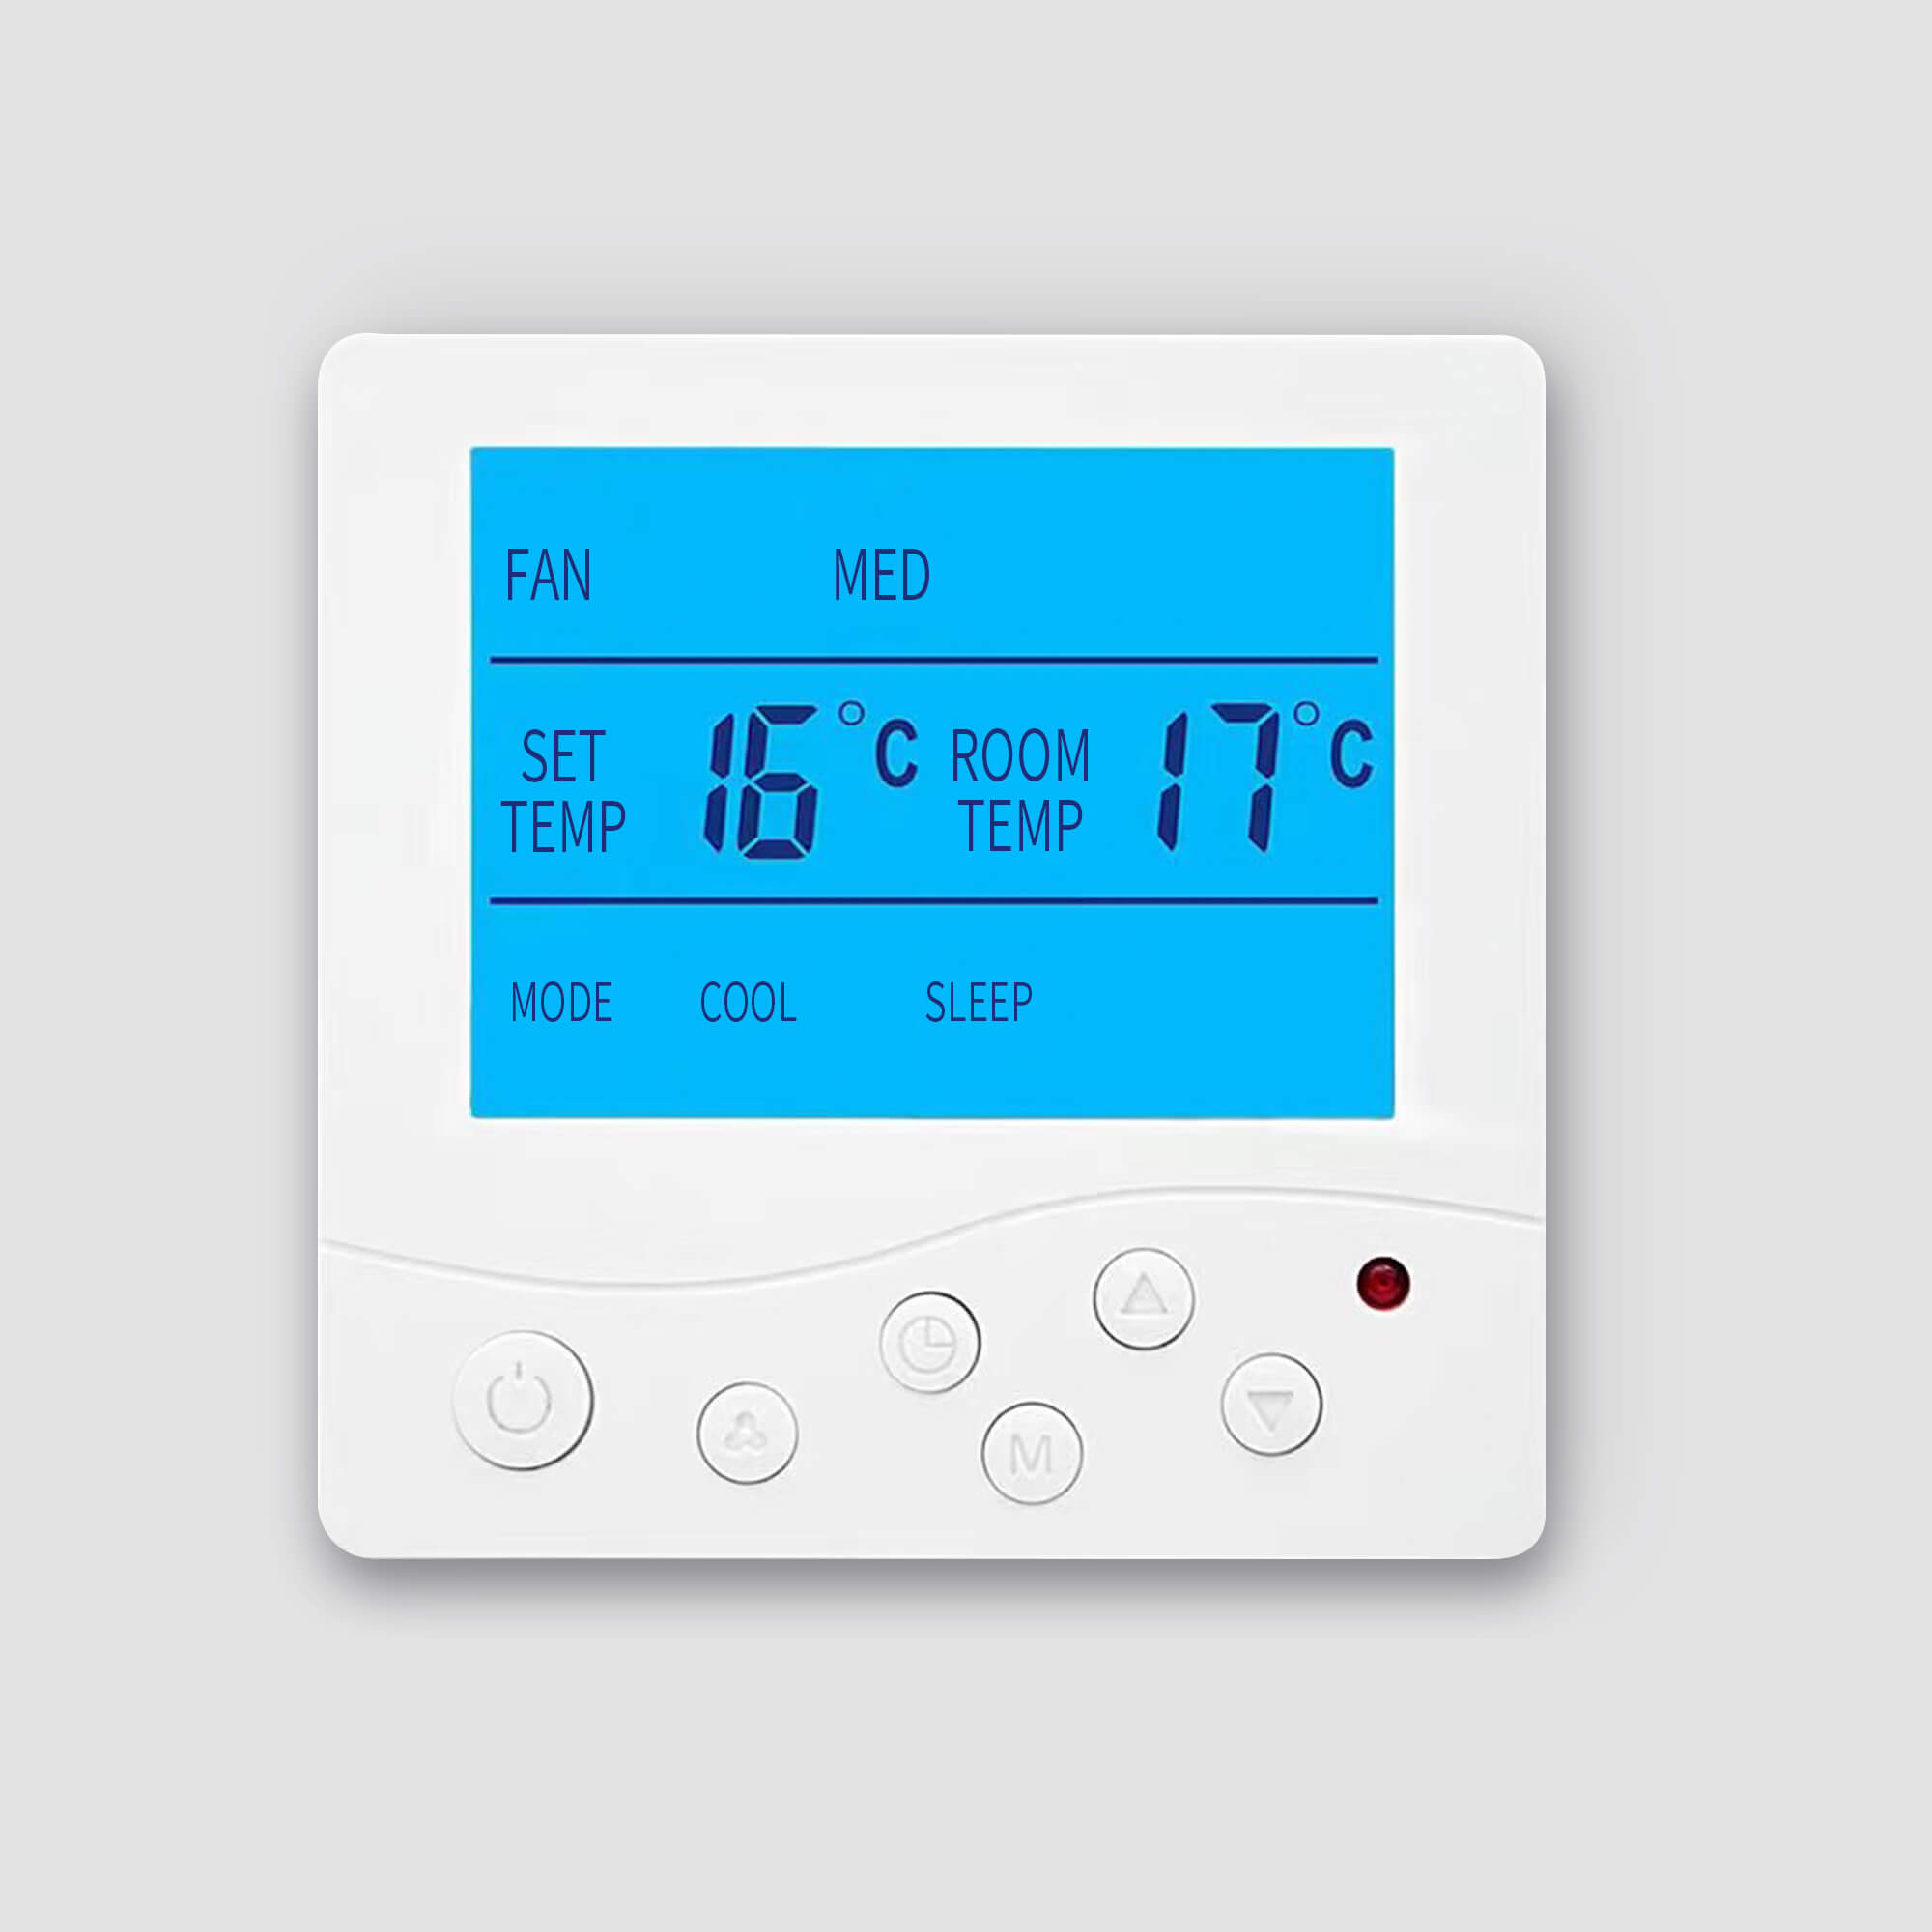 Wi-Fi Programmable Digital Room Thermostat.5. Send infrared signal to control infrared appliances such as air conditioners, TVs, set-top boxes, DVD players, AUX devices remotely.